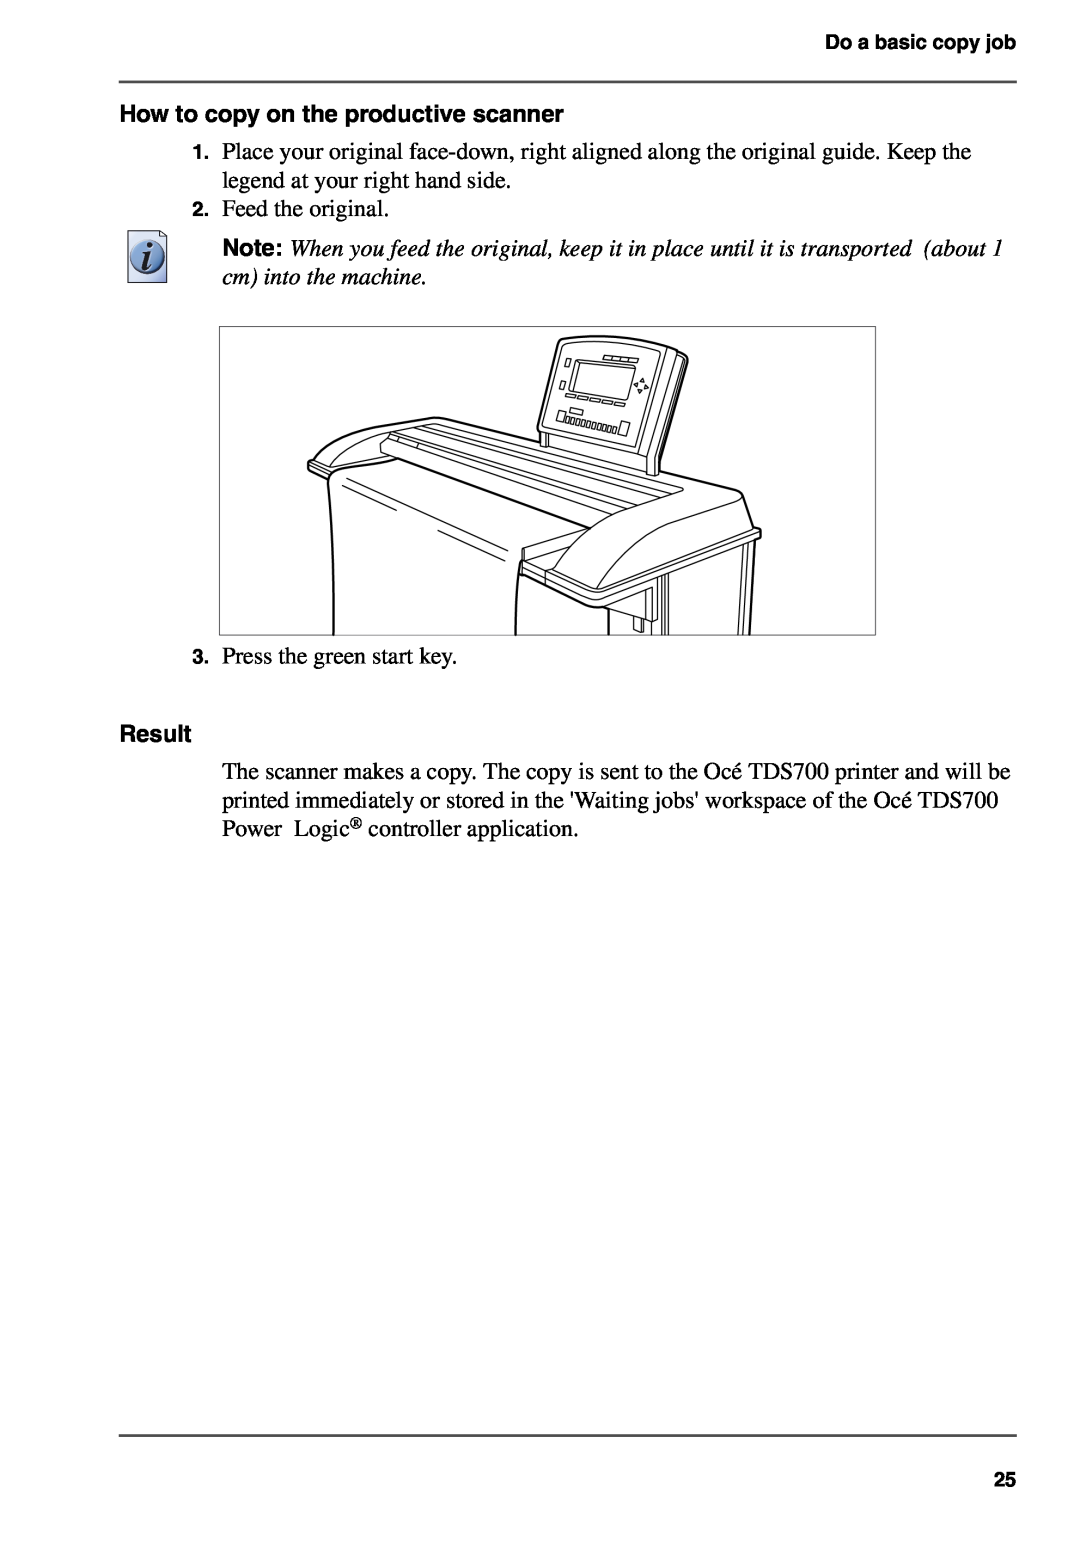 Oce North America TDS700 user manual How to copy on the productive scanner, Result 